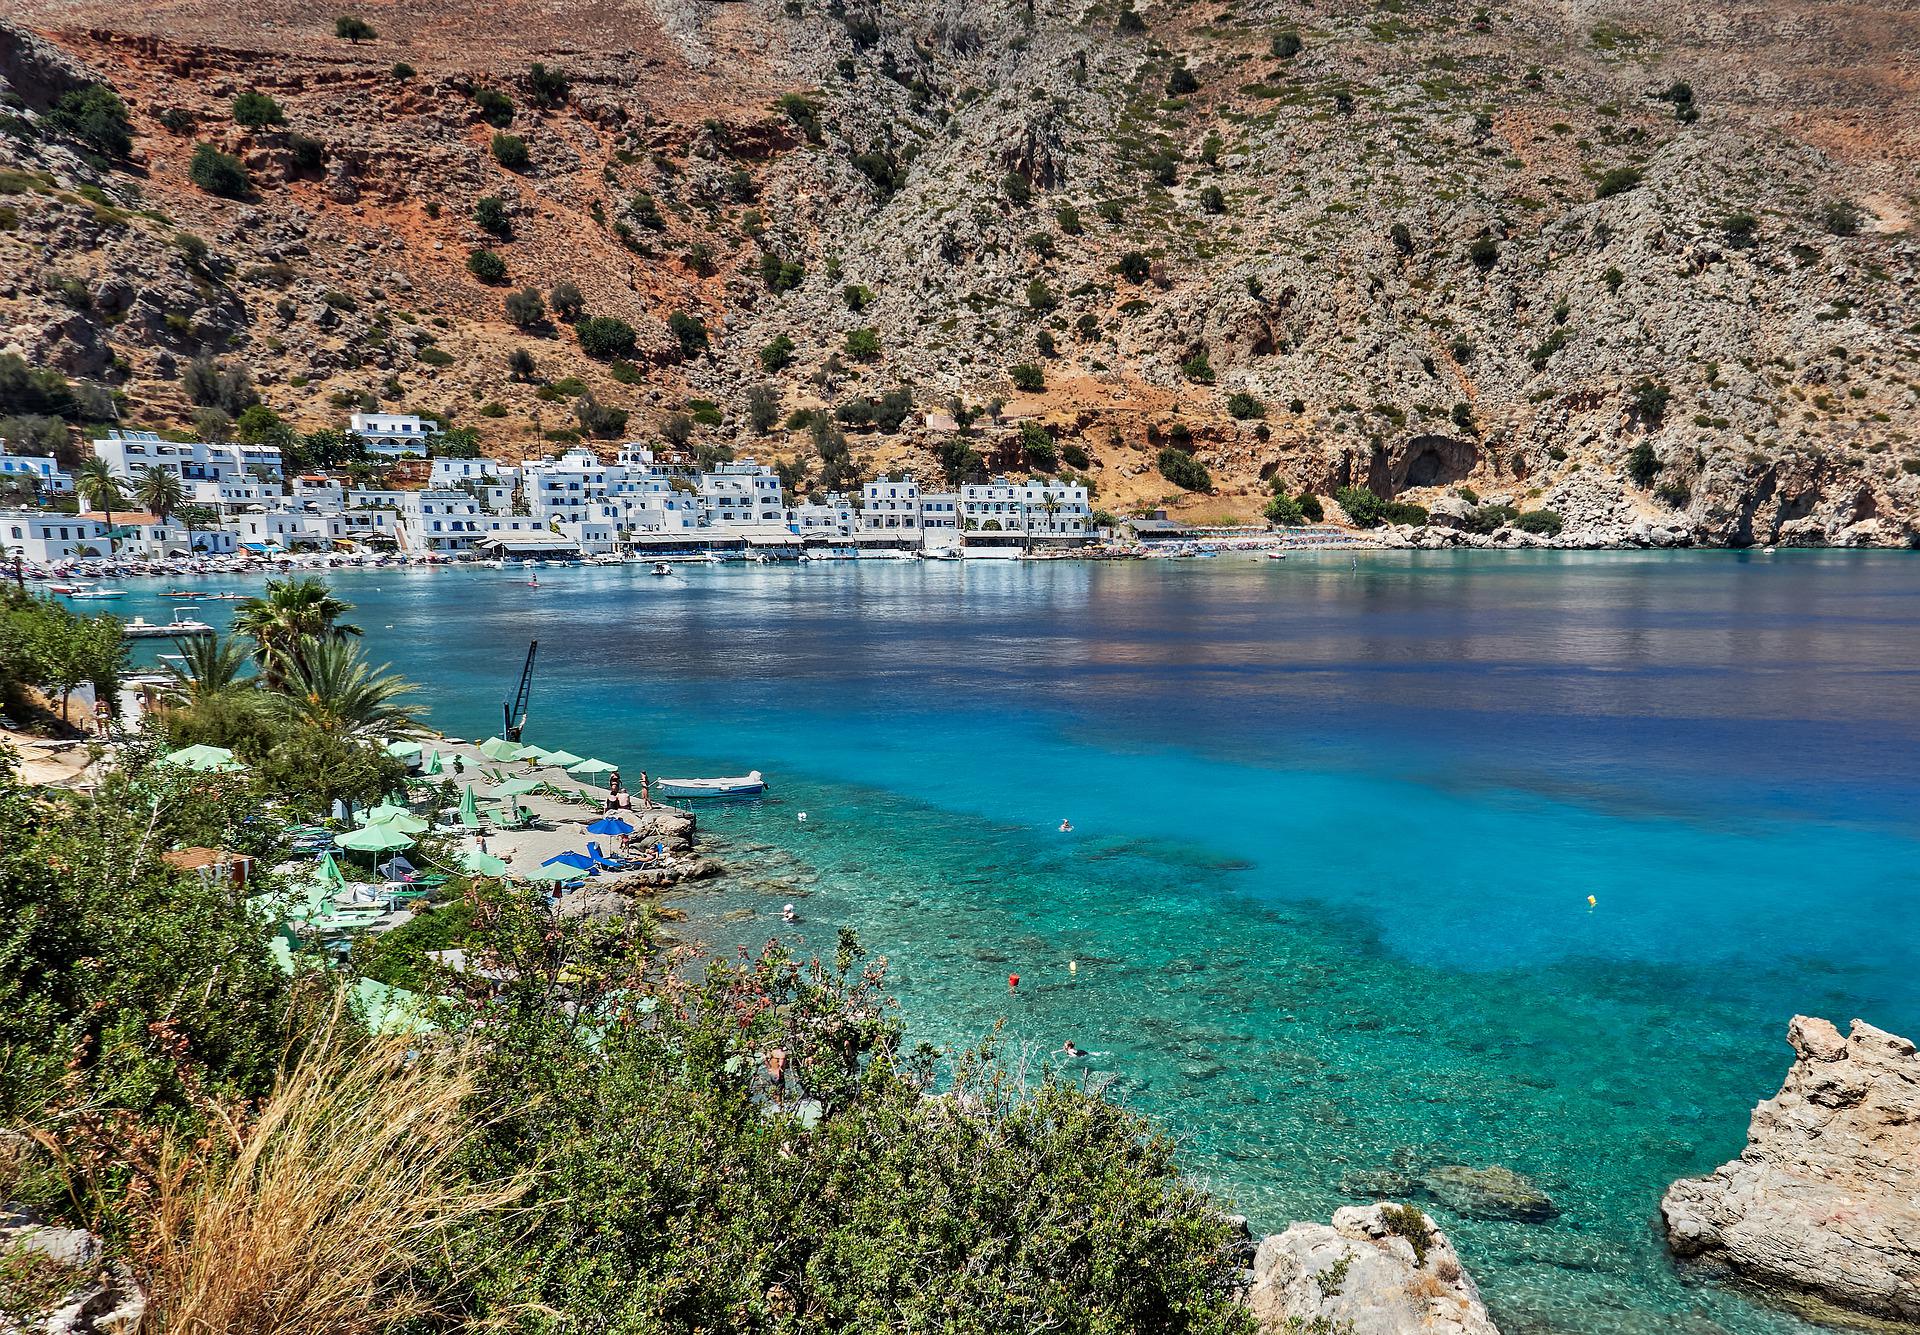 See glimmering blue waters and white-washed buildings in Loutro. One of the best hidden gems!
